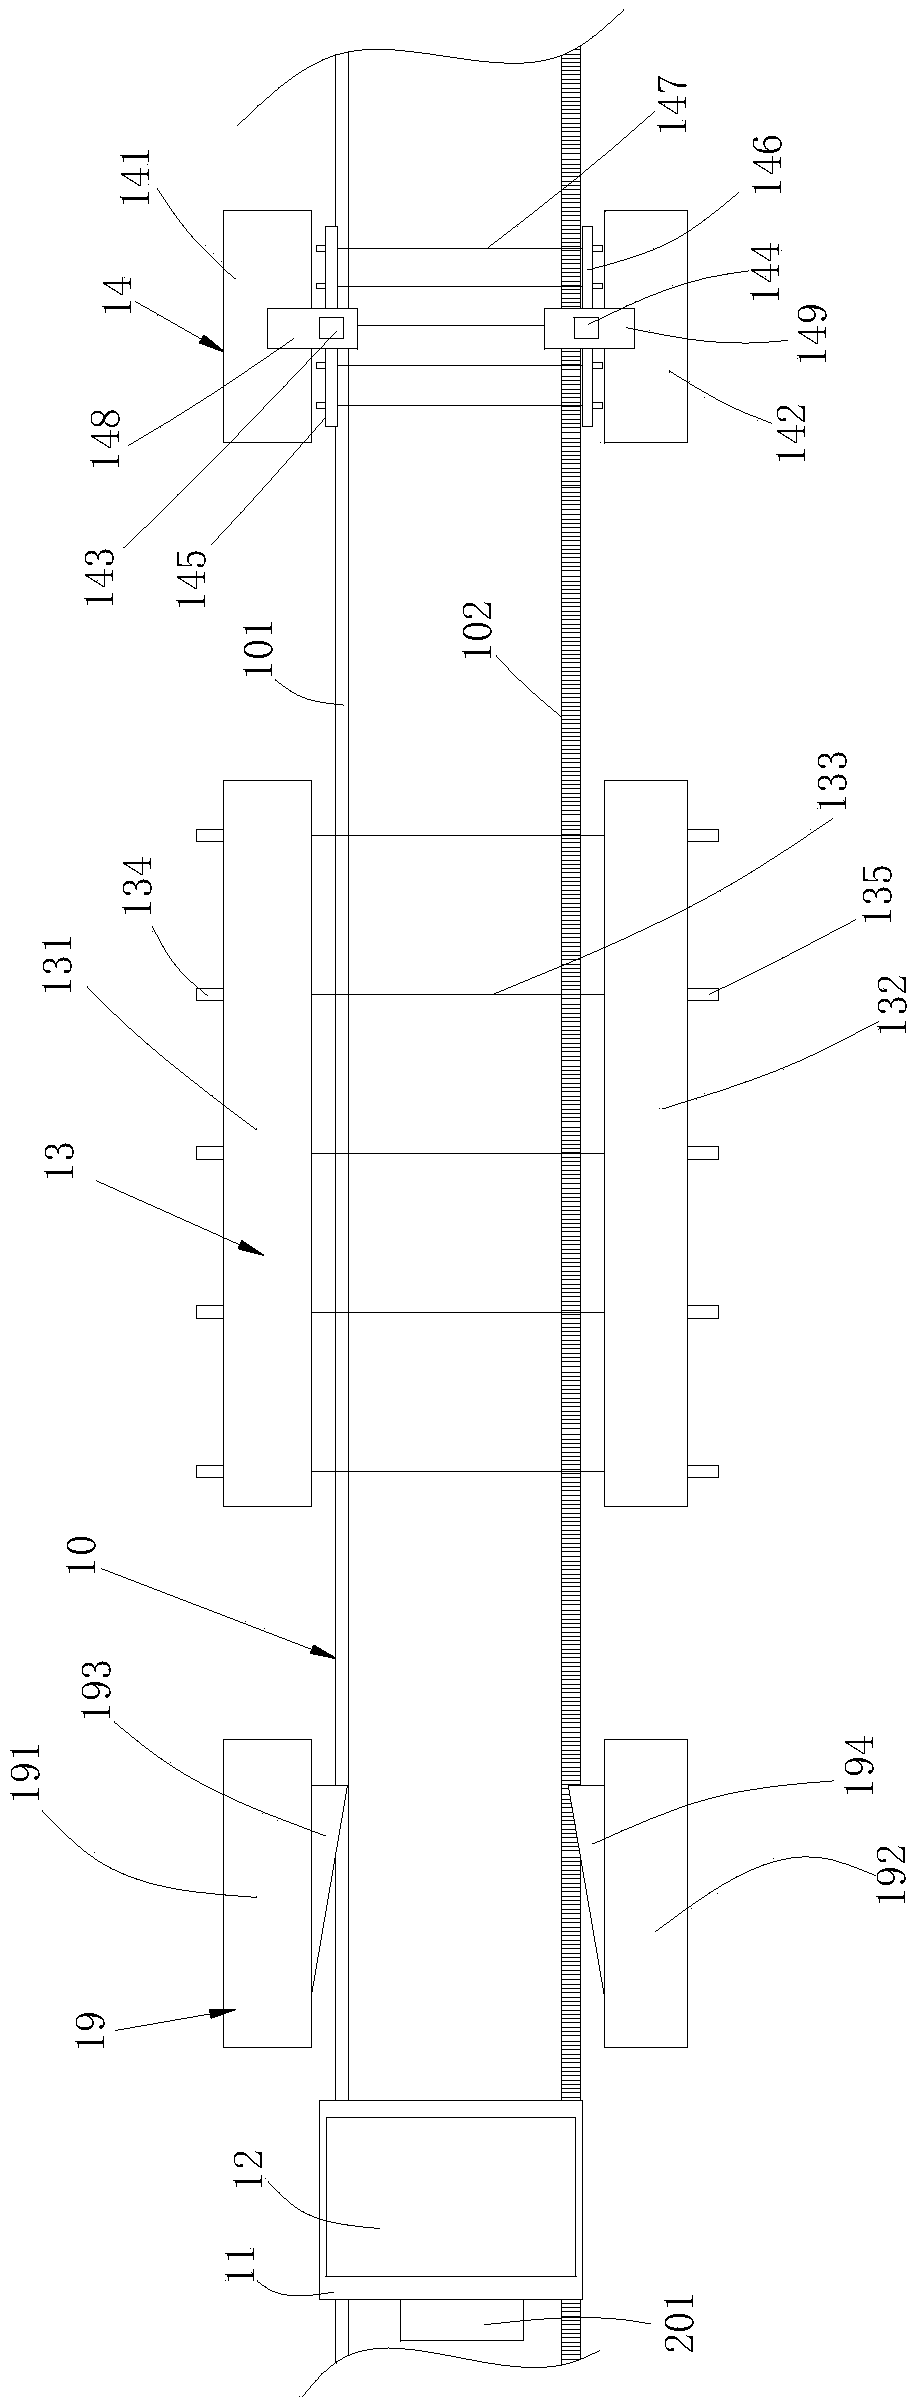 A foam brick cutting device with smoother sliding